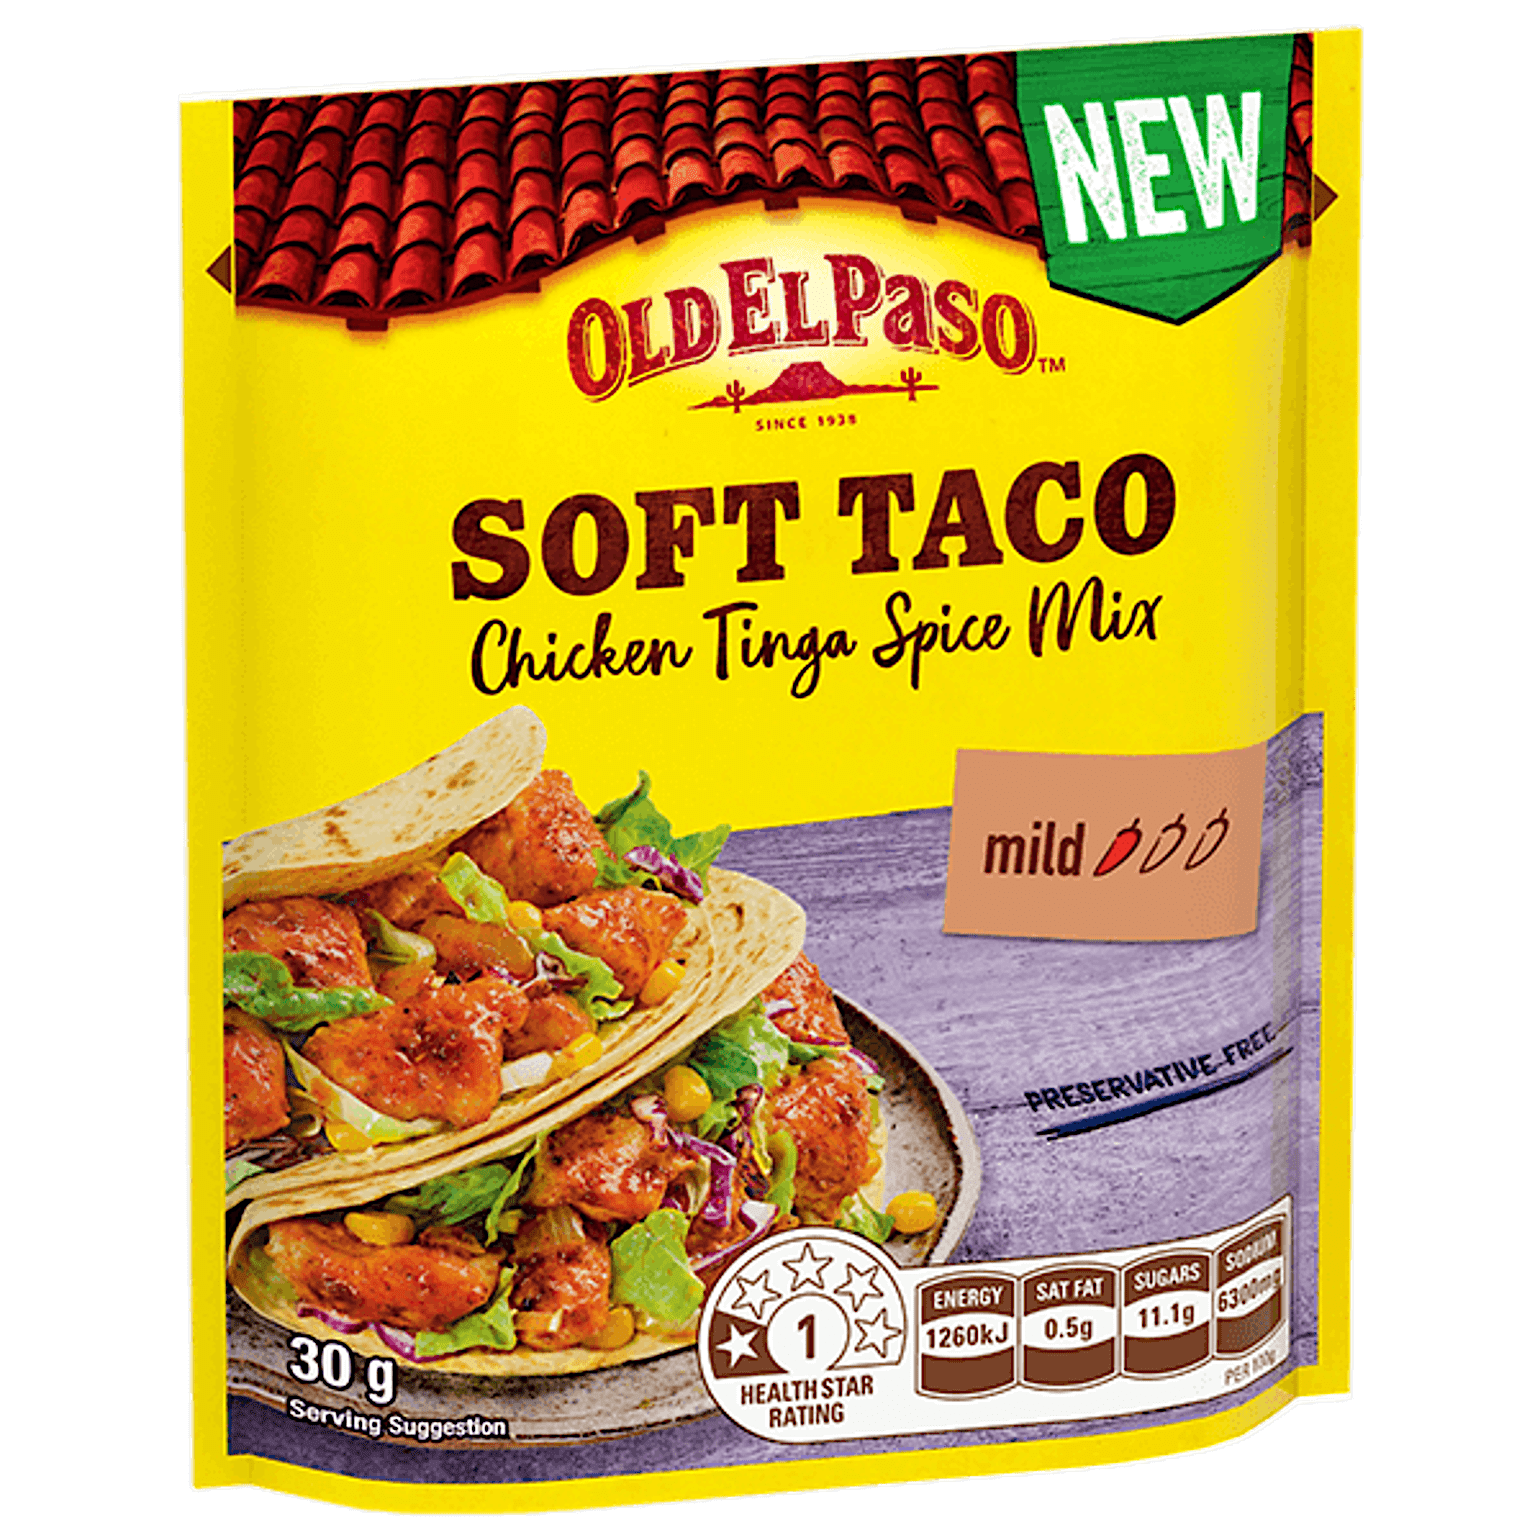 a pack of Old El Paso's soft taco chicken tinga spice mix mild (30g)